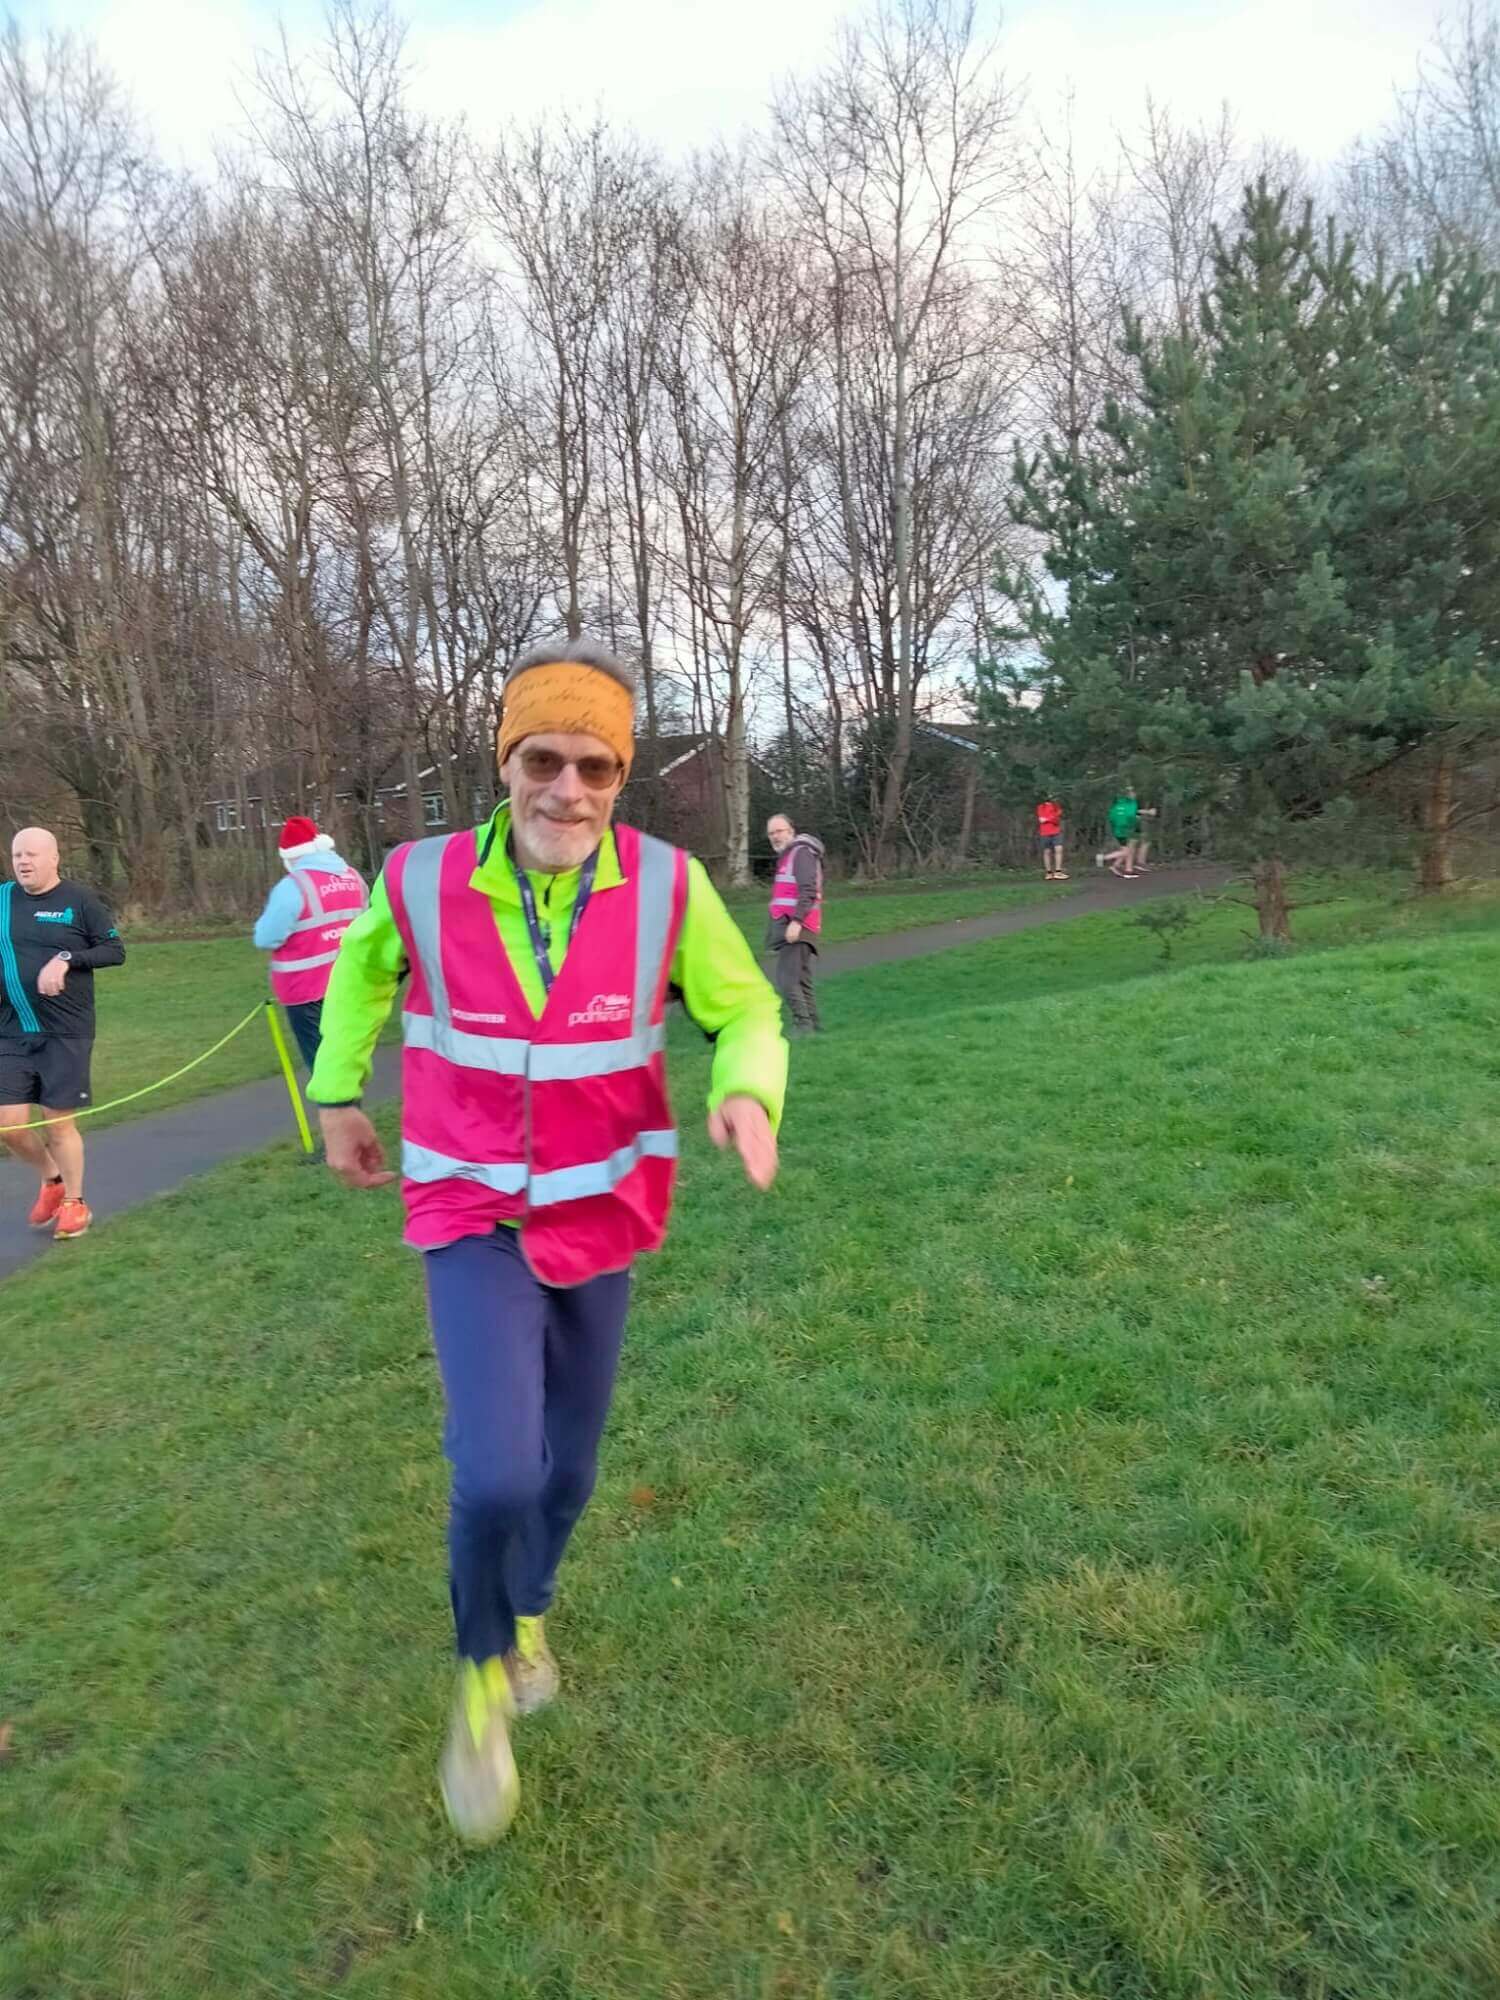 Sustainable Exercise Partnership - Wammy parkrun with Adri running as volunteers with other volunteers in background